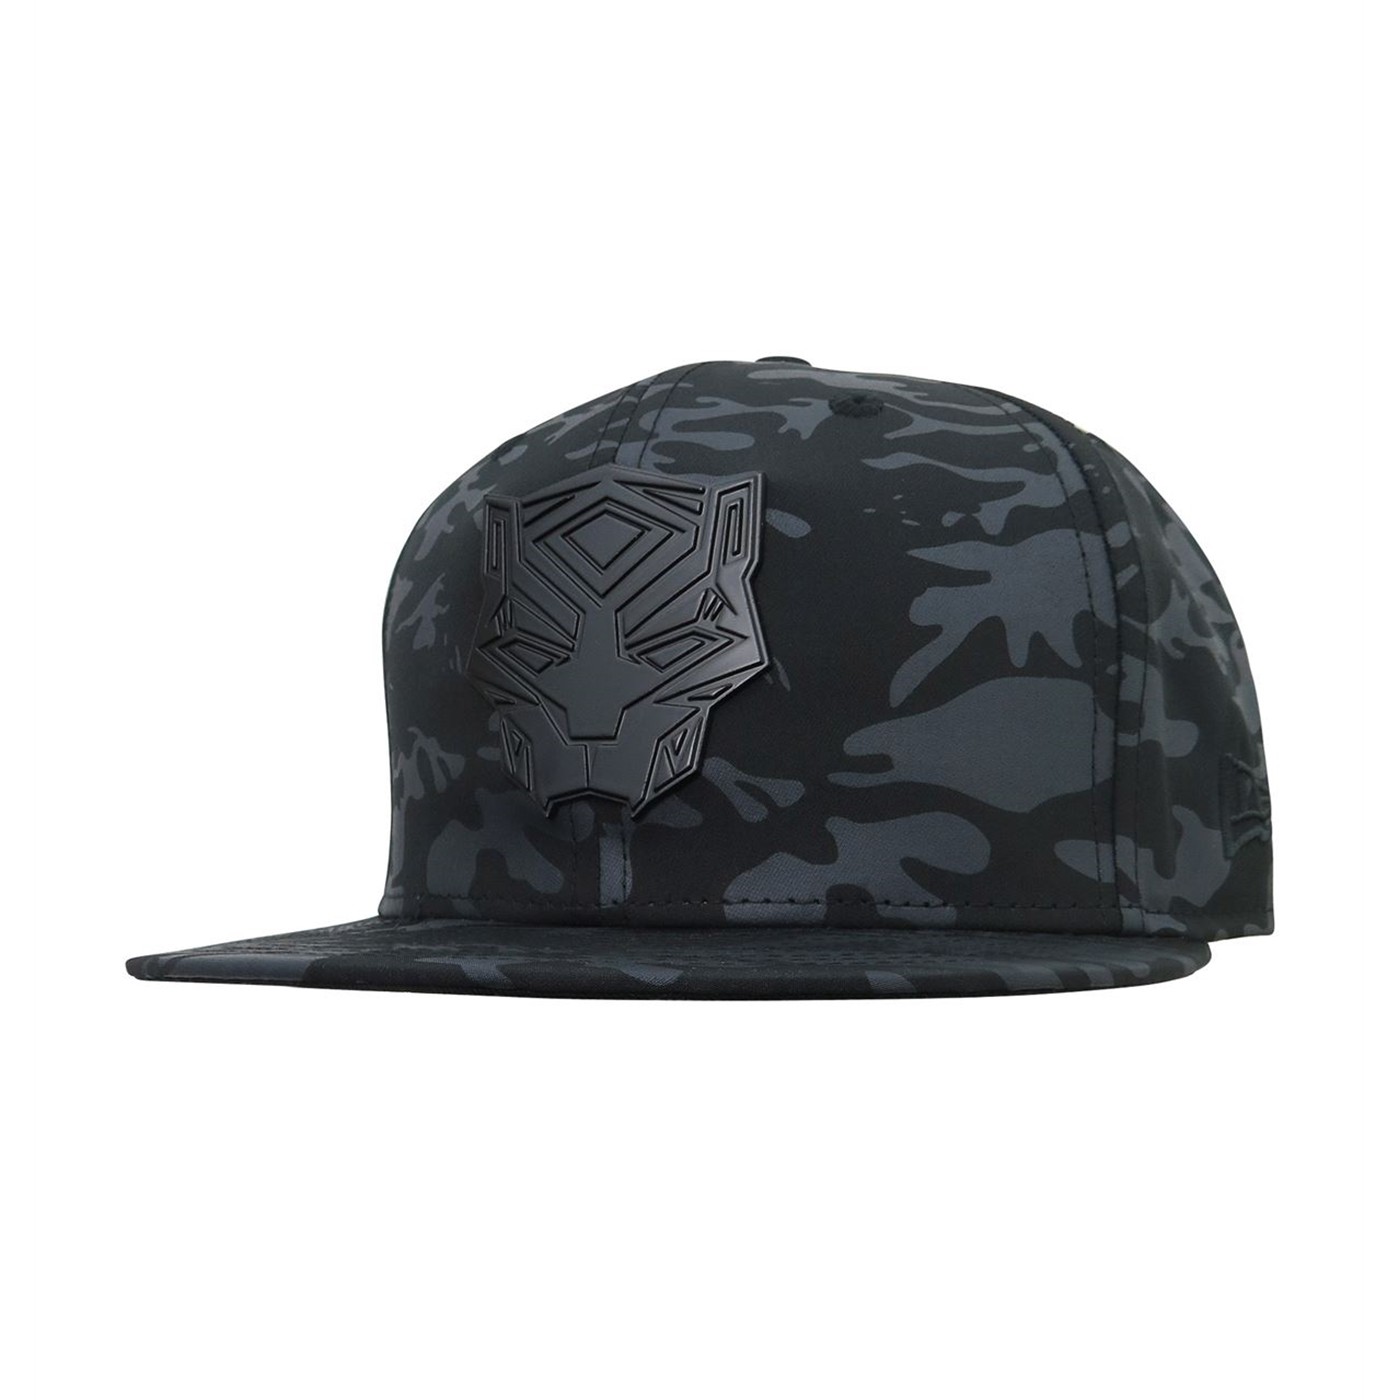 Black Panther Metal Badge with Camo 59Fifty Fitted Hat